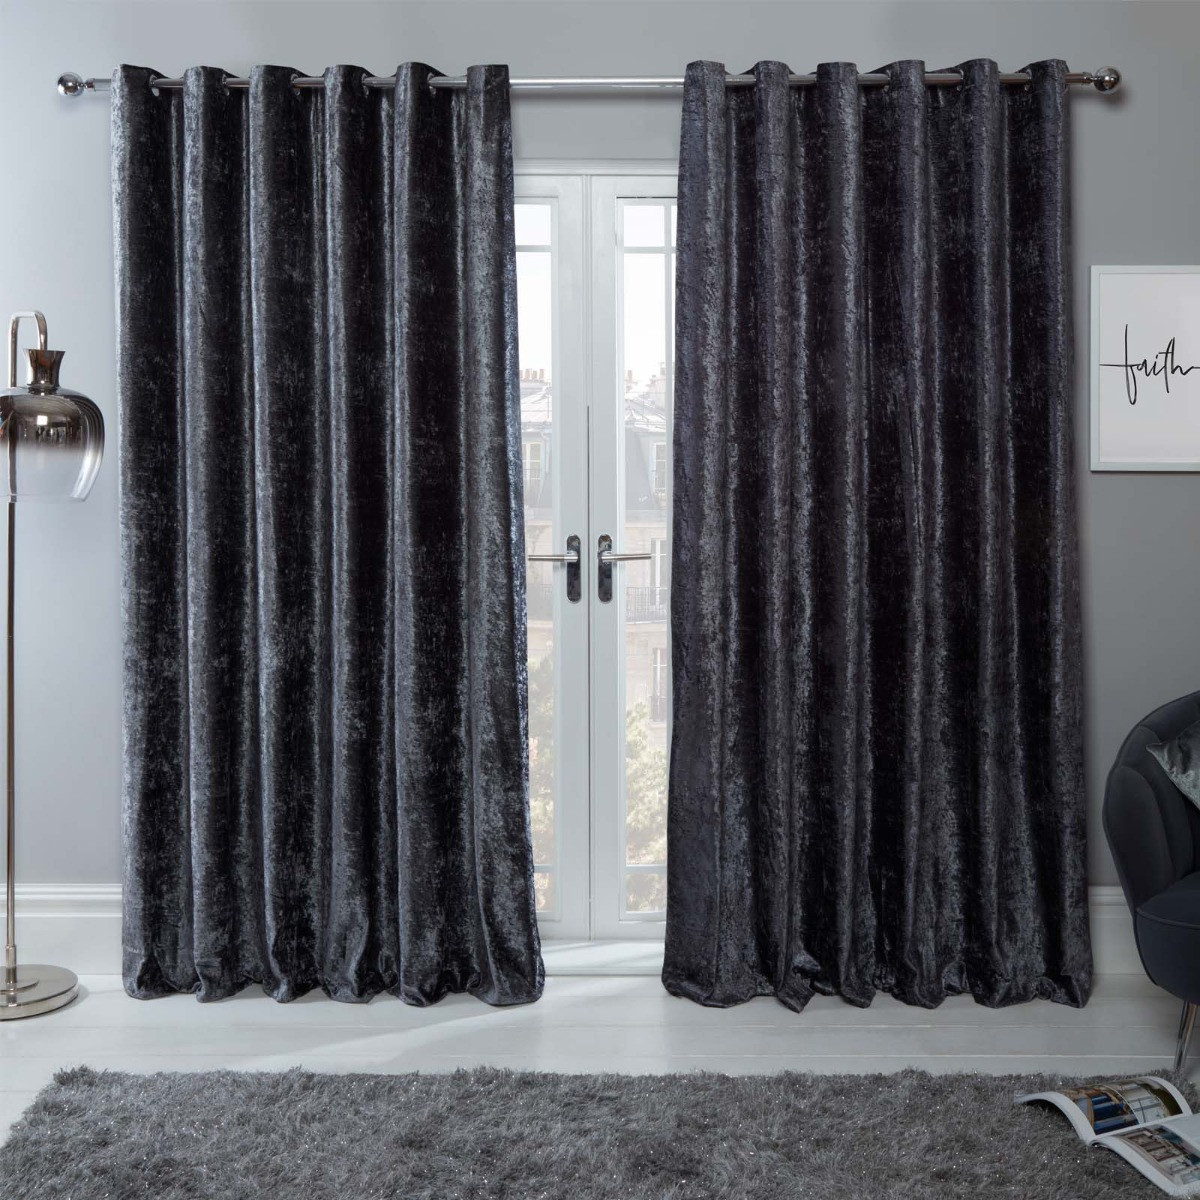 Sienna Home Crushed Velvet Eyelet Curtains - Charcoal Grey 90" x 54">